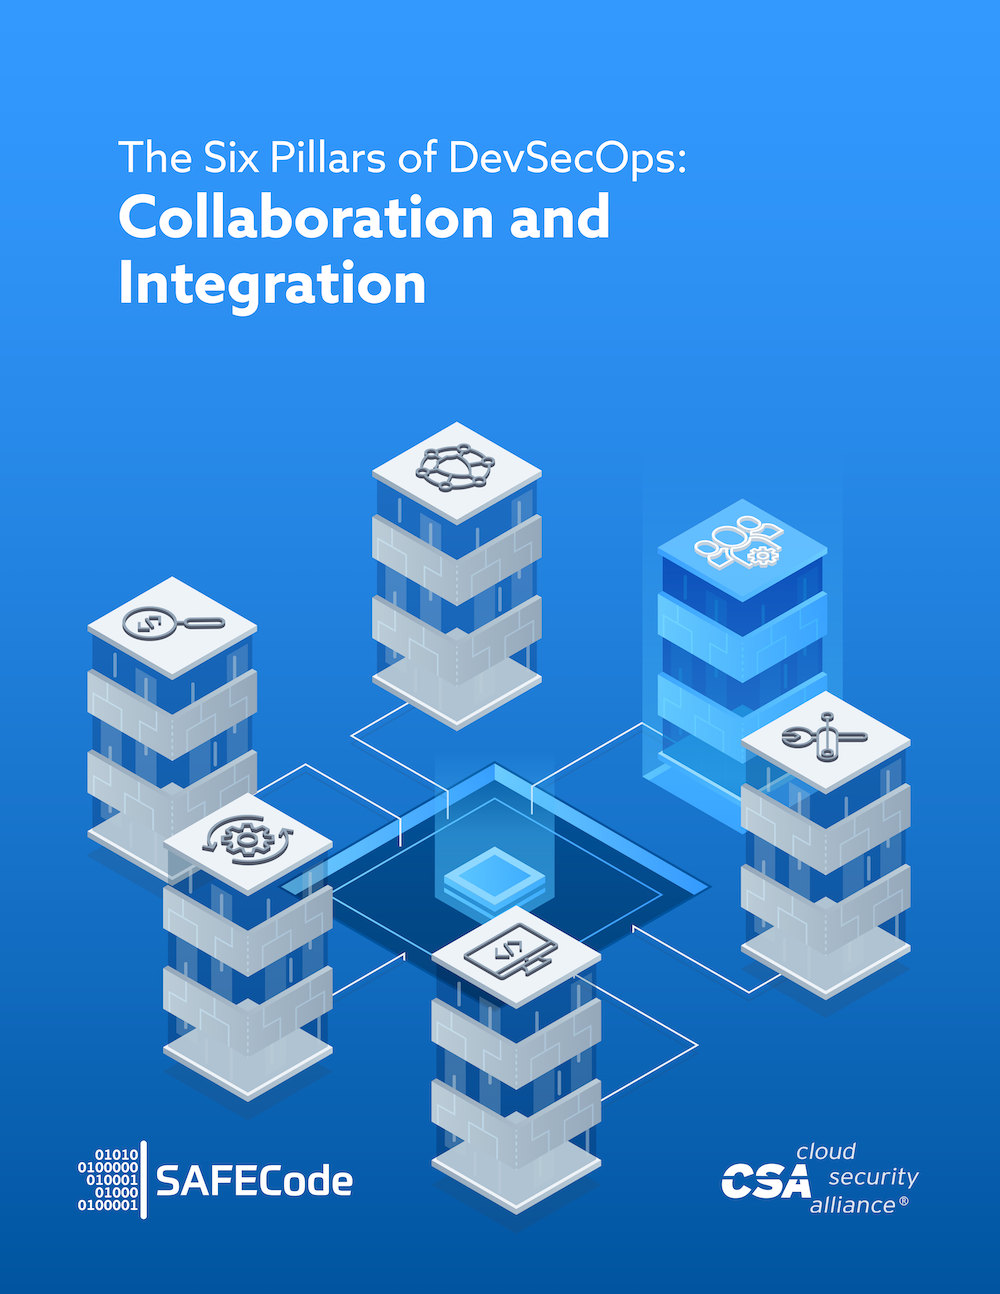 The Six Pillars of DevSecOps - Collaboration and Integration